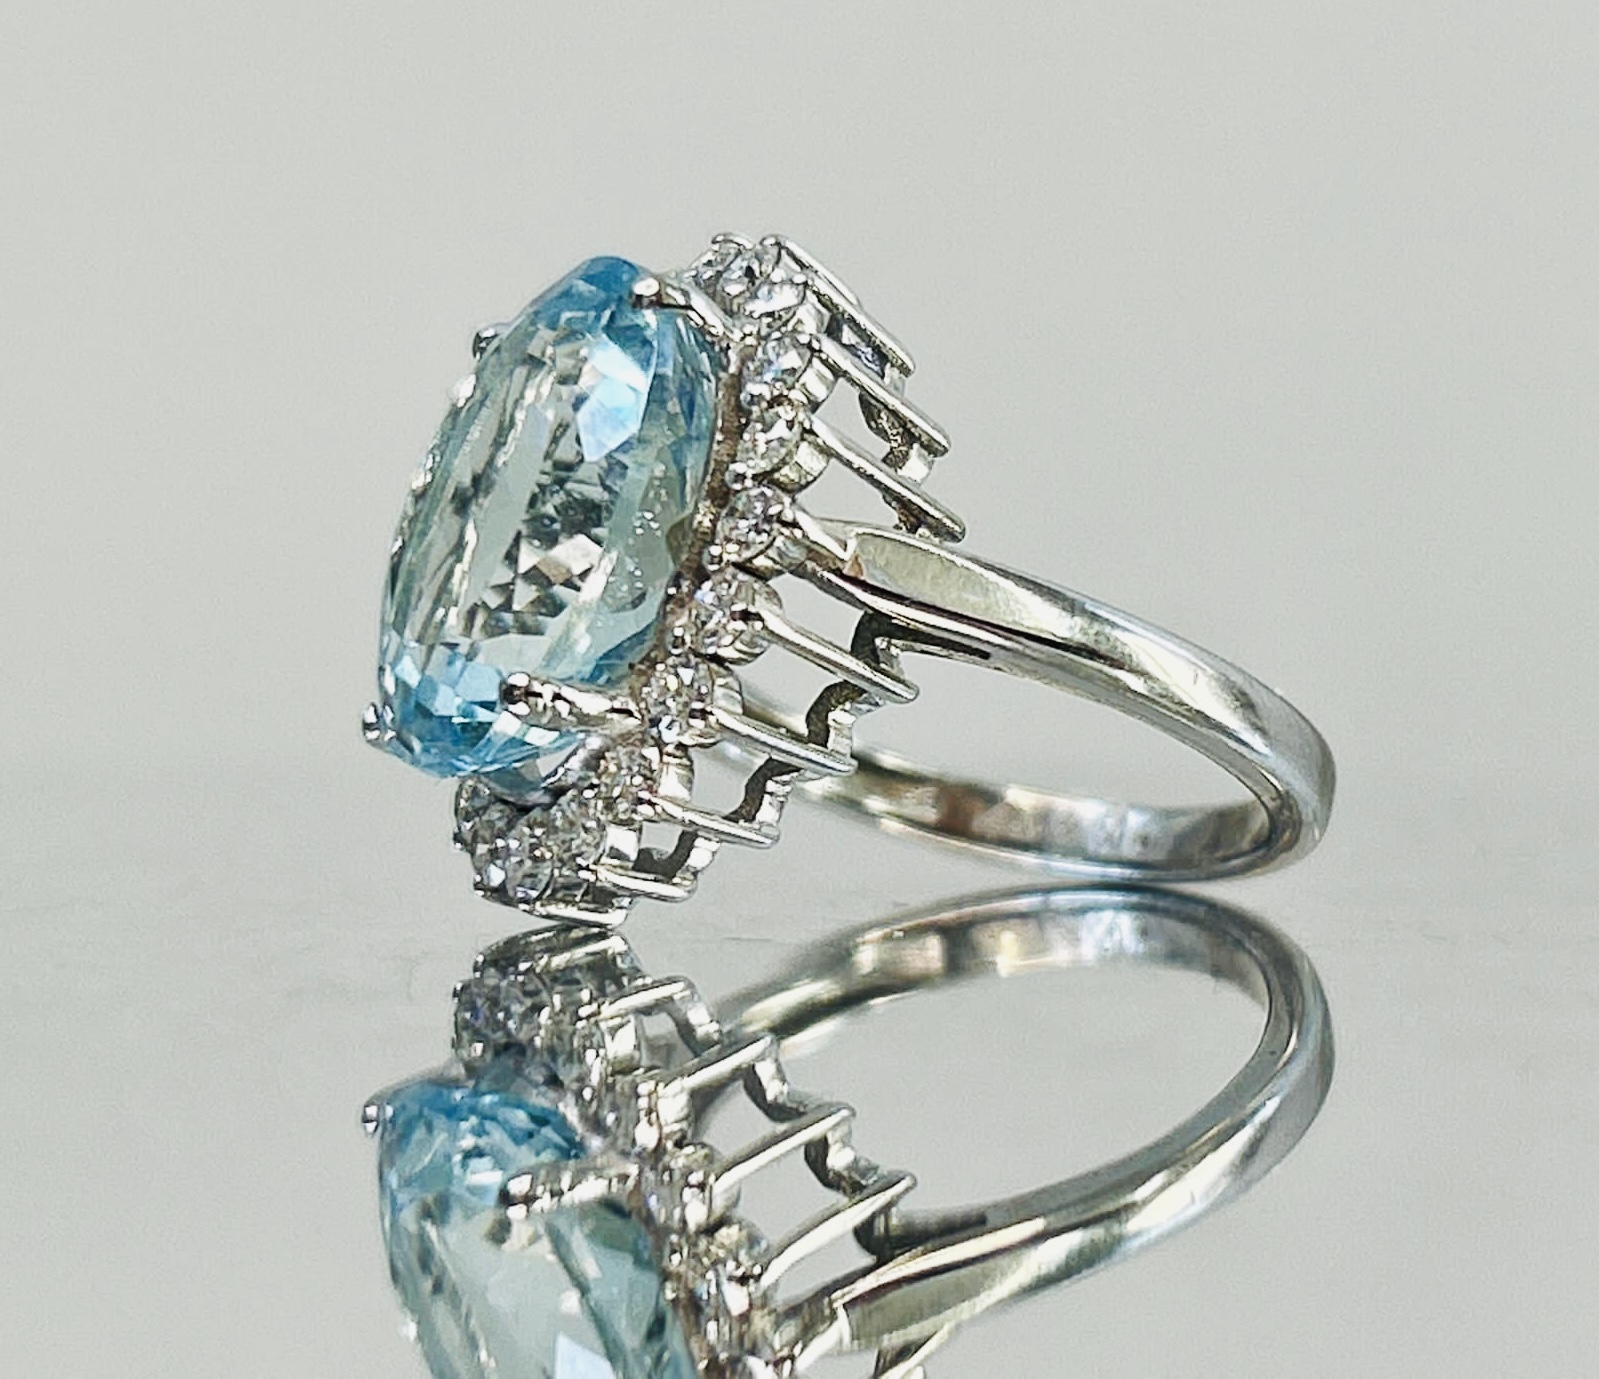 Beautiful Natural Flawless 7.30 CT Aquamarine Ring With Diamonds and 18k Gold - Image 3 of 7